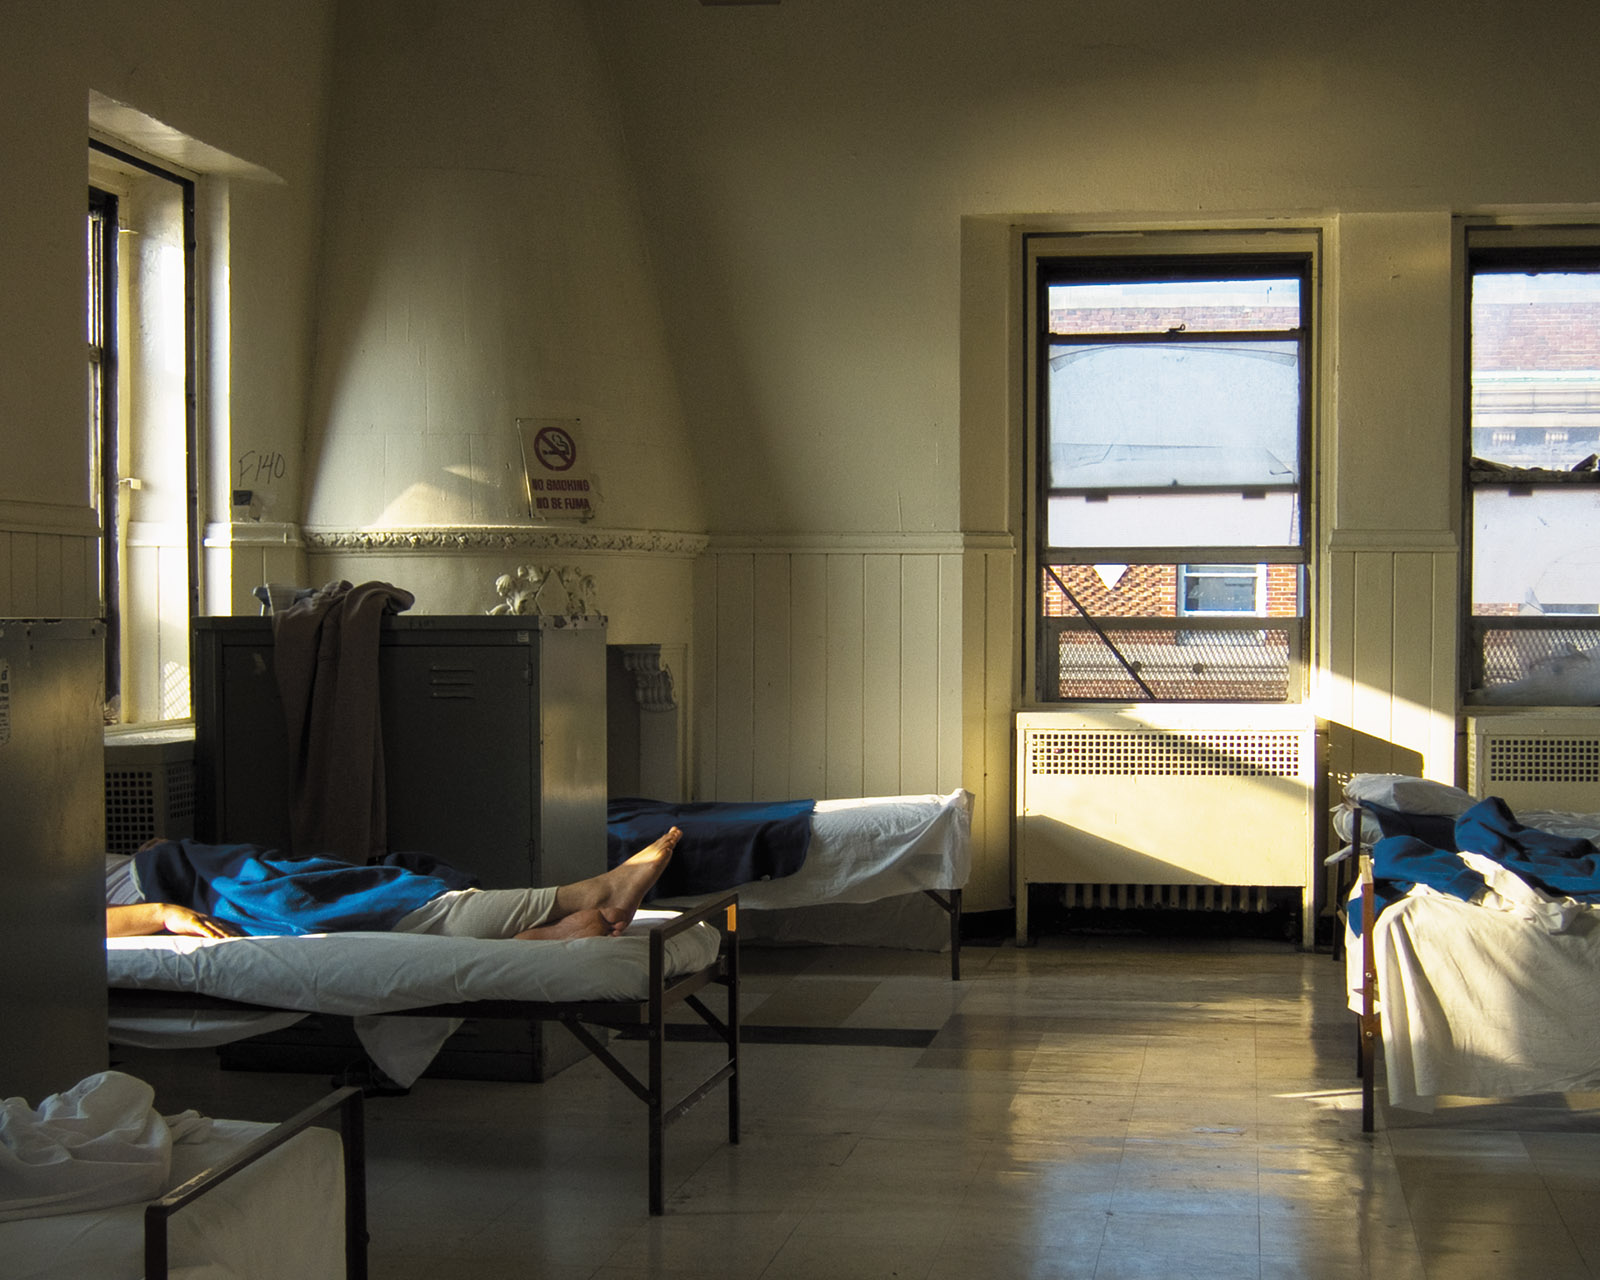 A shared room at the Bellevue Men’s Shelter, housed since 1984 in the former psychiatric building of Bellevue Hospital, New York City, 2010; photograph by Eric Michael Johnson